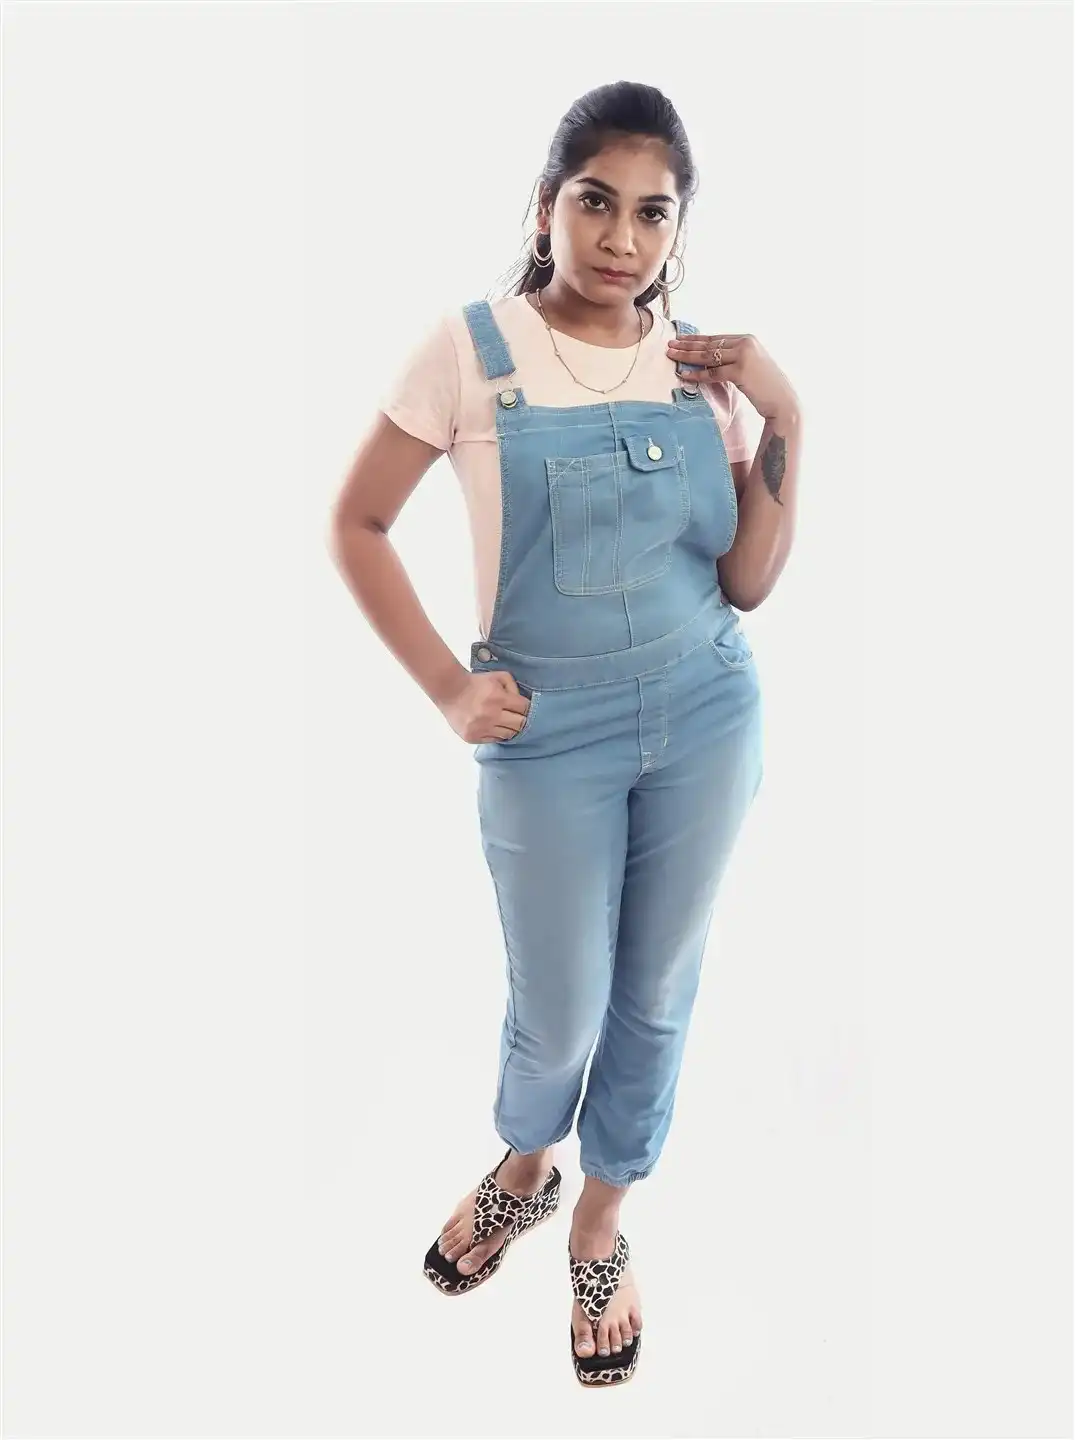 New Womens Oversized Baggy Casual Denim Dungarees Jeans Jumpsuit Pants  Overalls | eBay